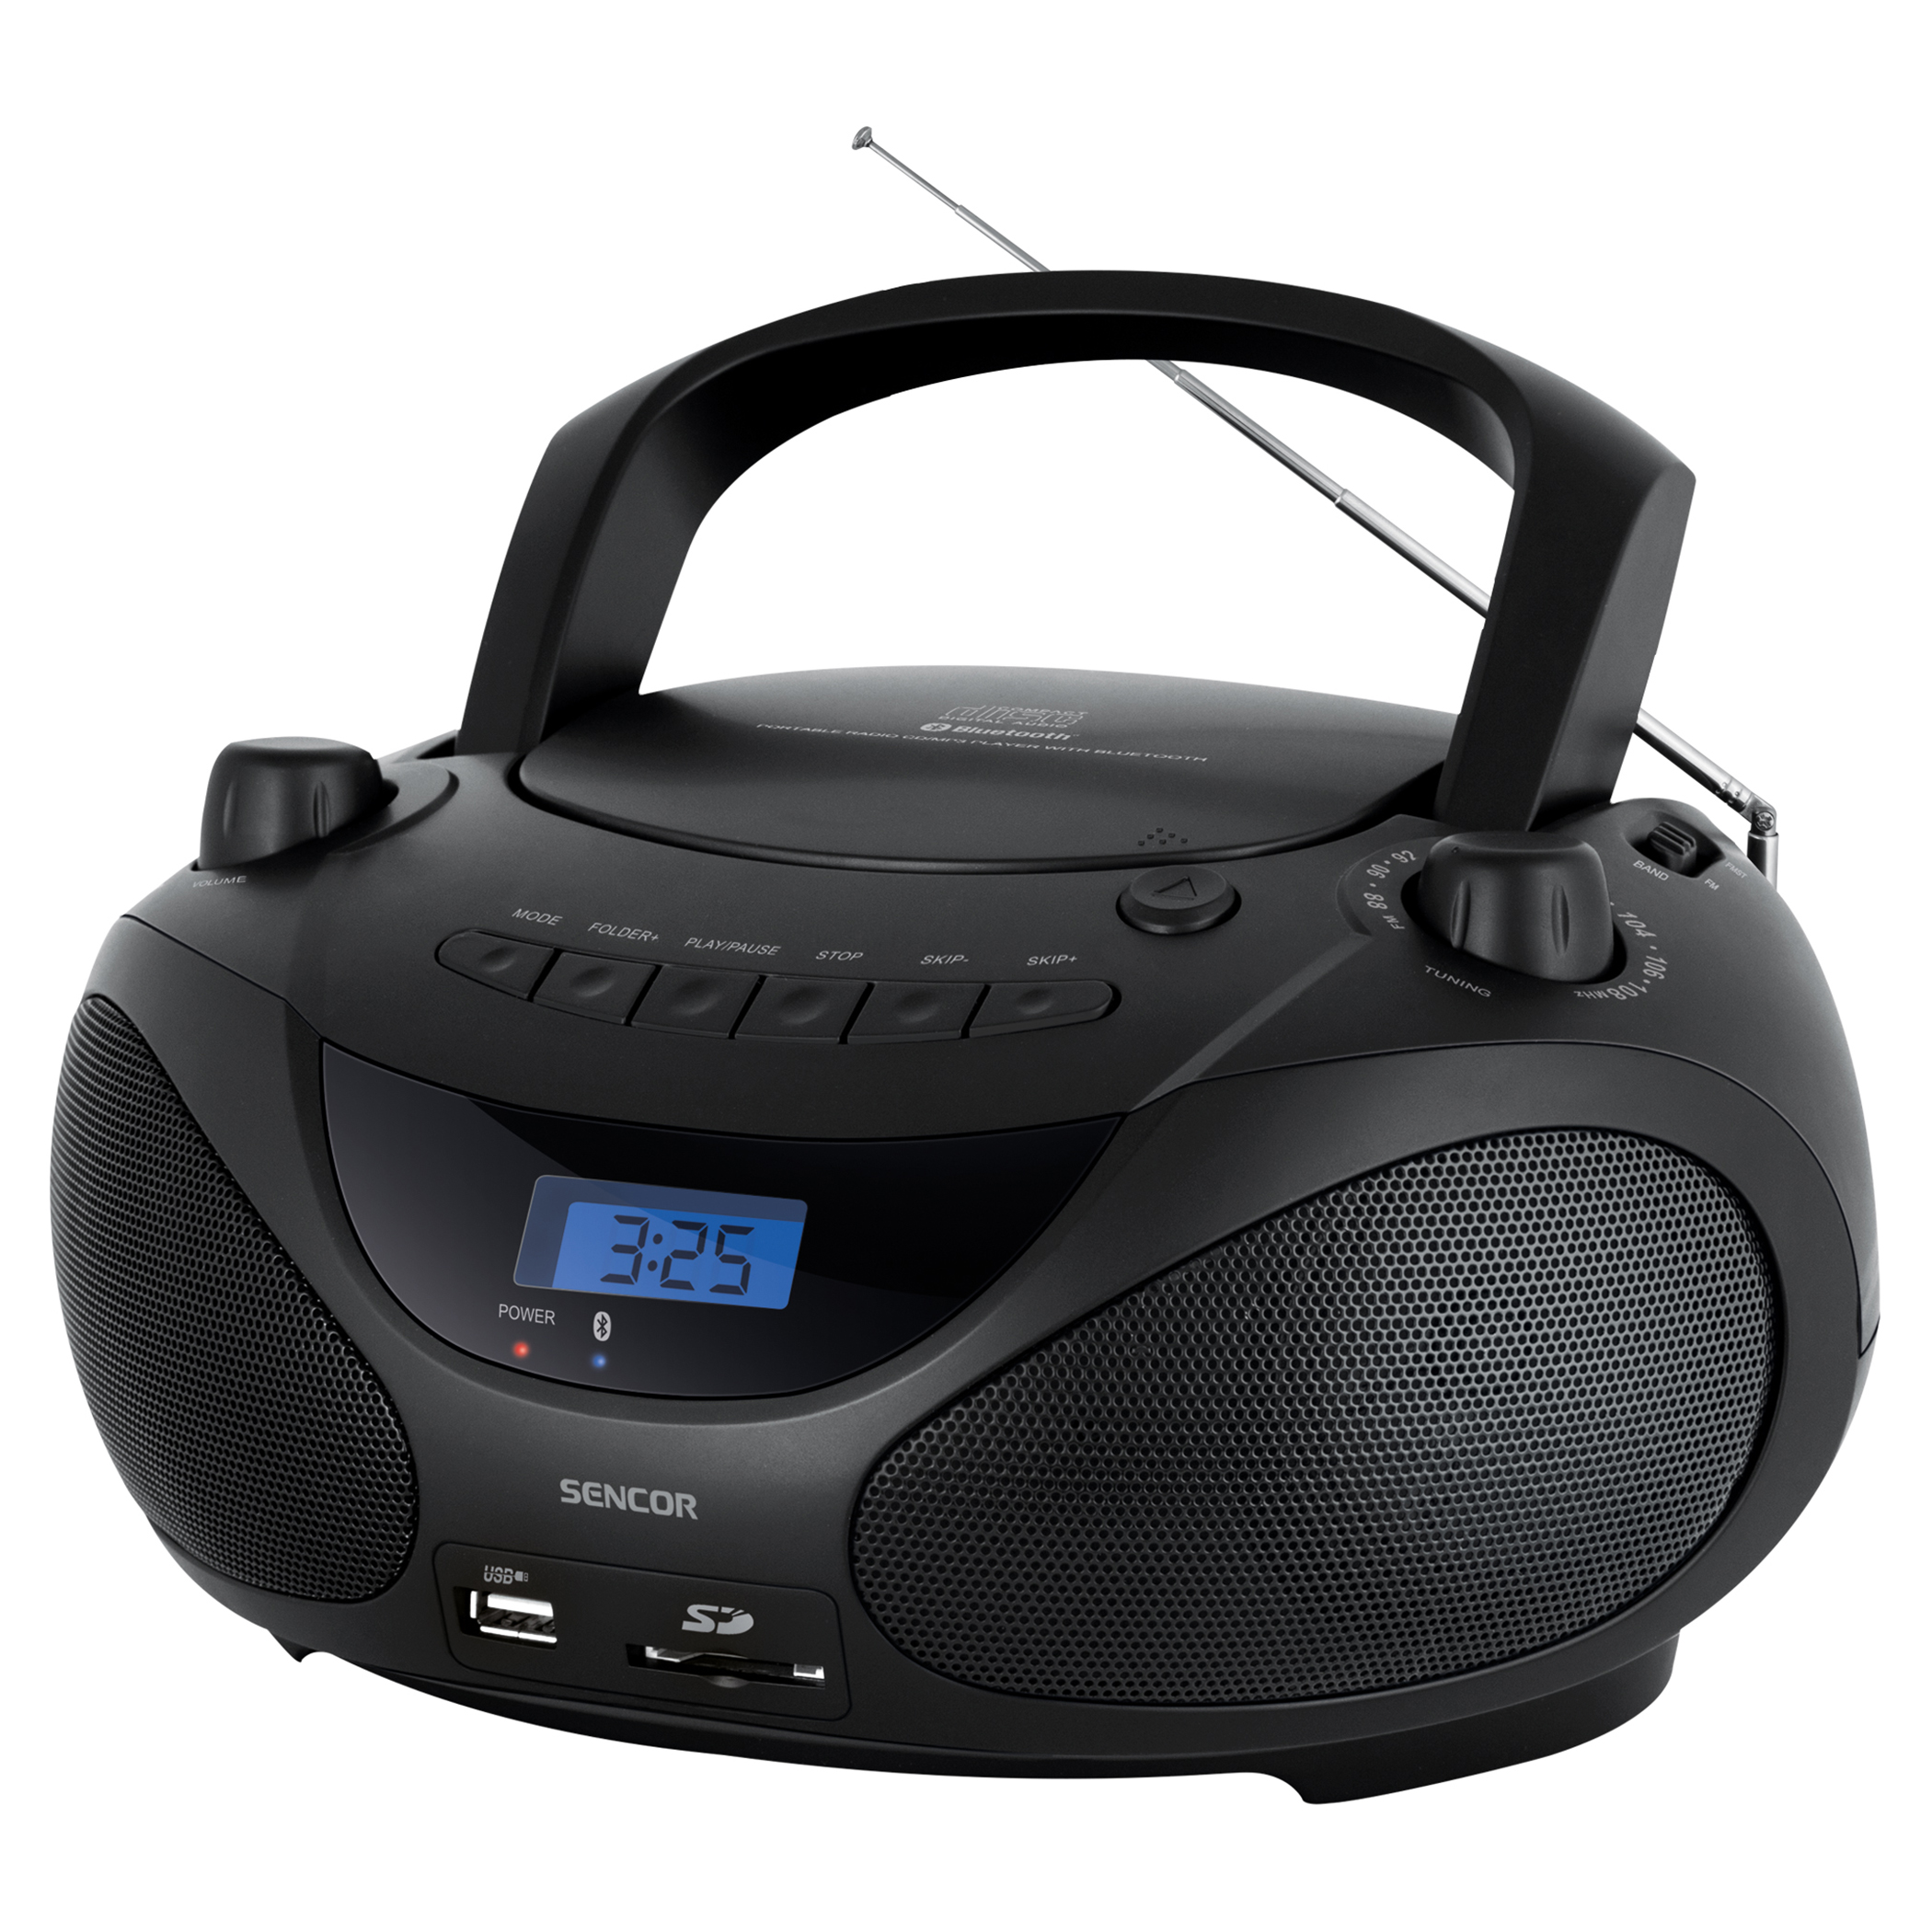 Portable CD Player with BT, MP3, USB, SD, AUX and FM Radio